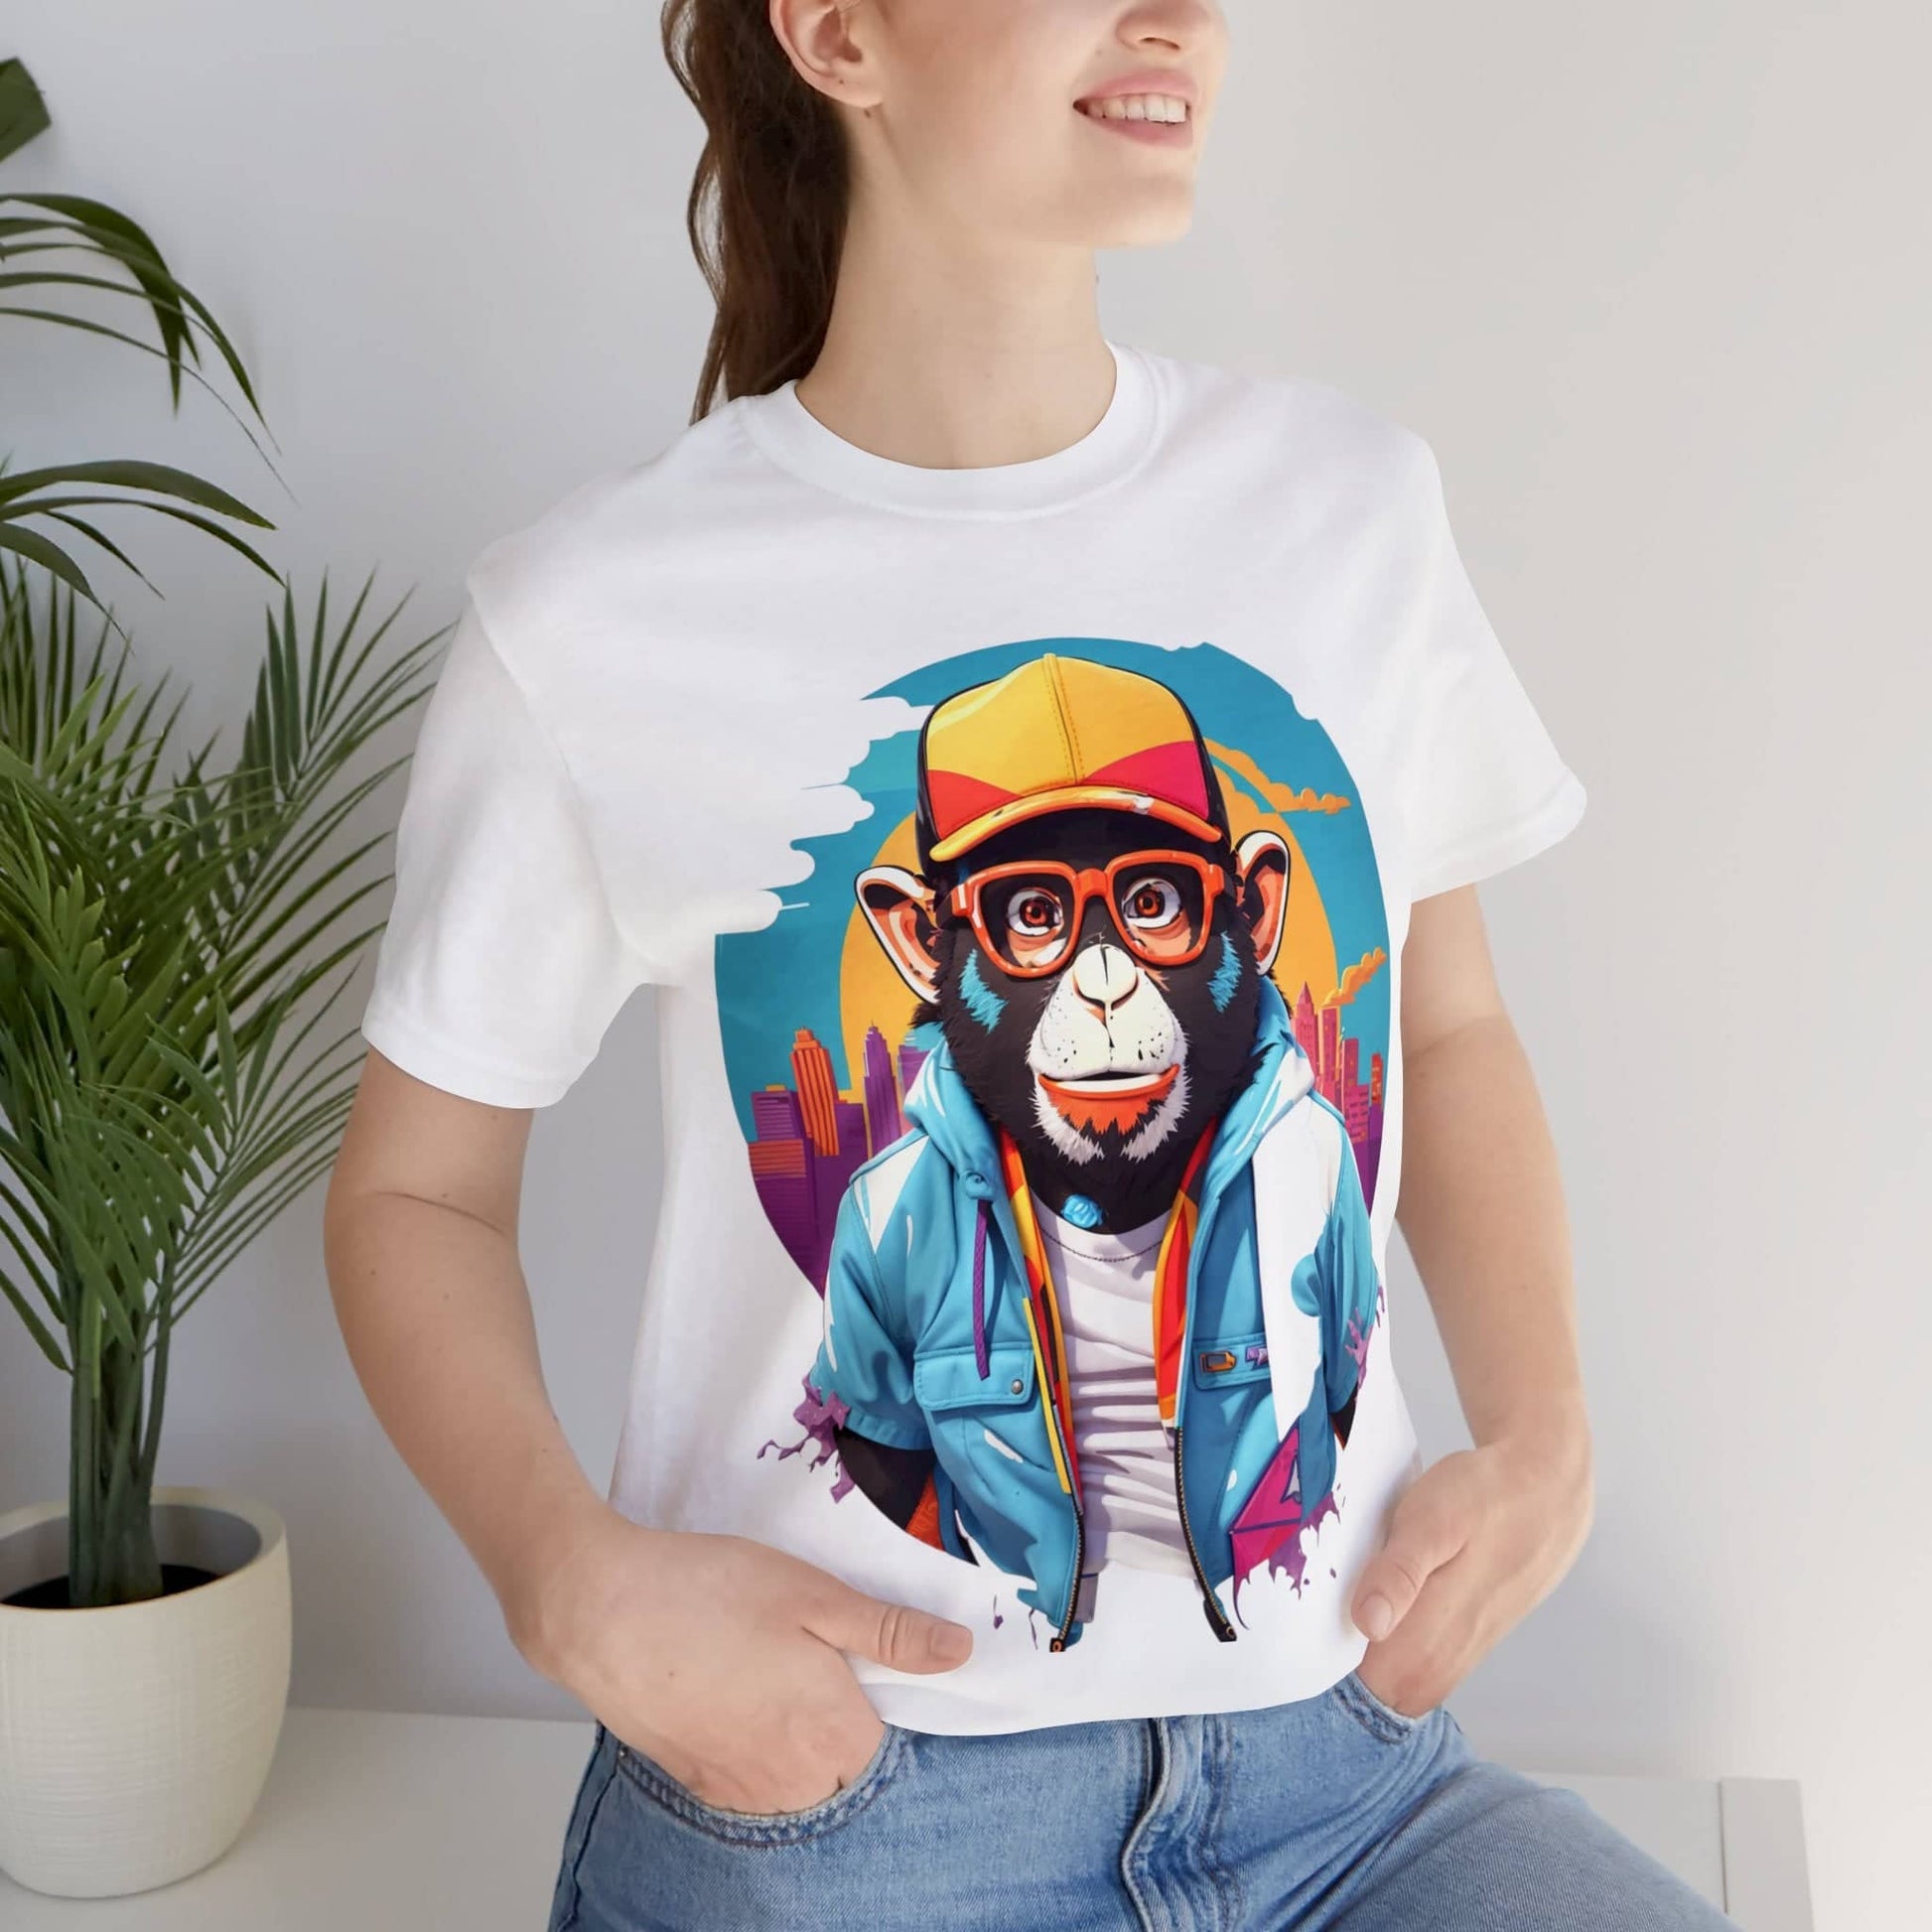 "Limited Edition Graffiti Gorilla: Urban Hip-Hop Graphic Tee for the Trendy Streetwear Connoisseur" T-Shirt Bigger Than Life White S 